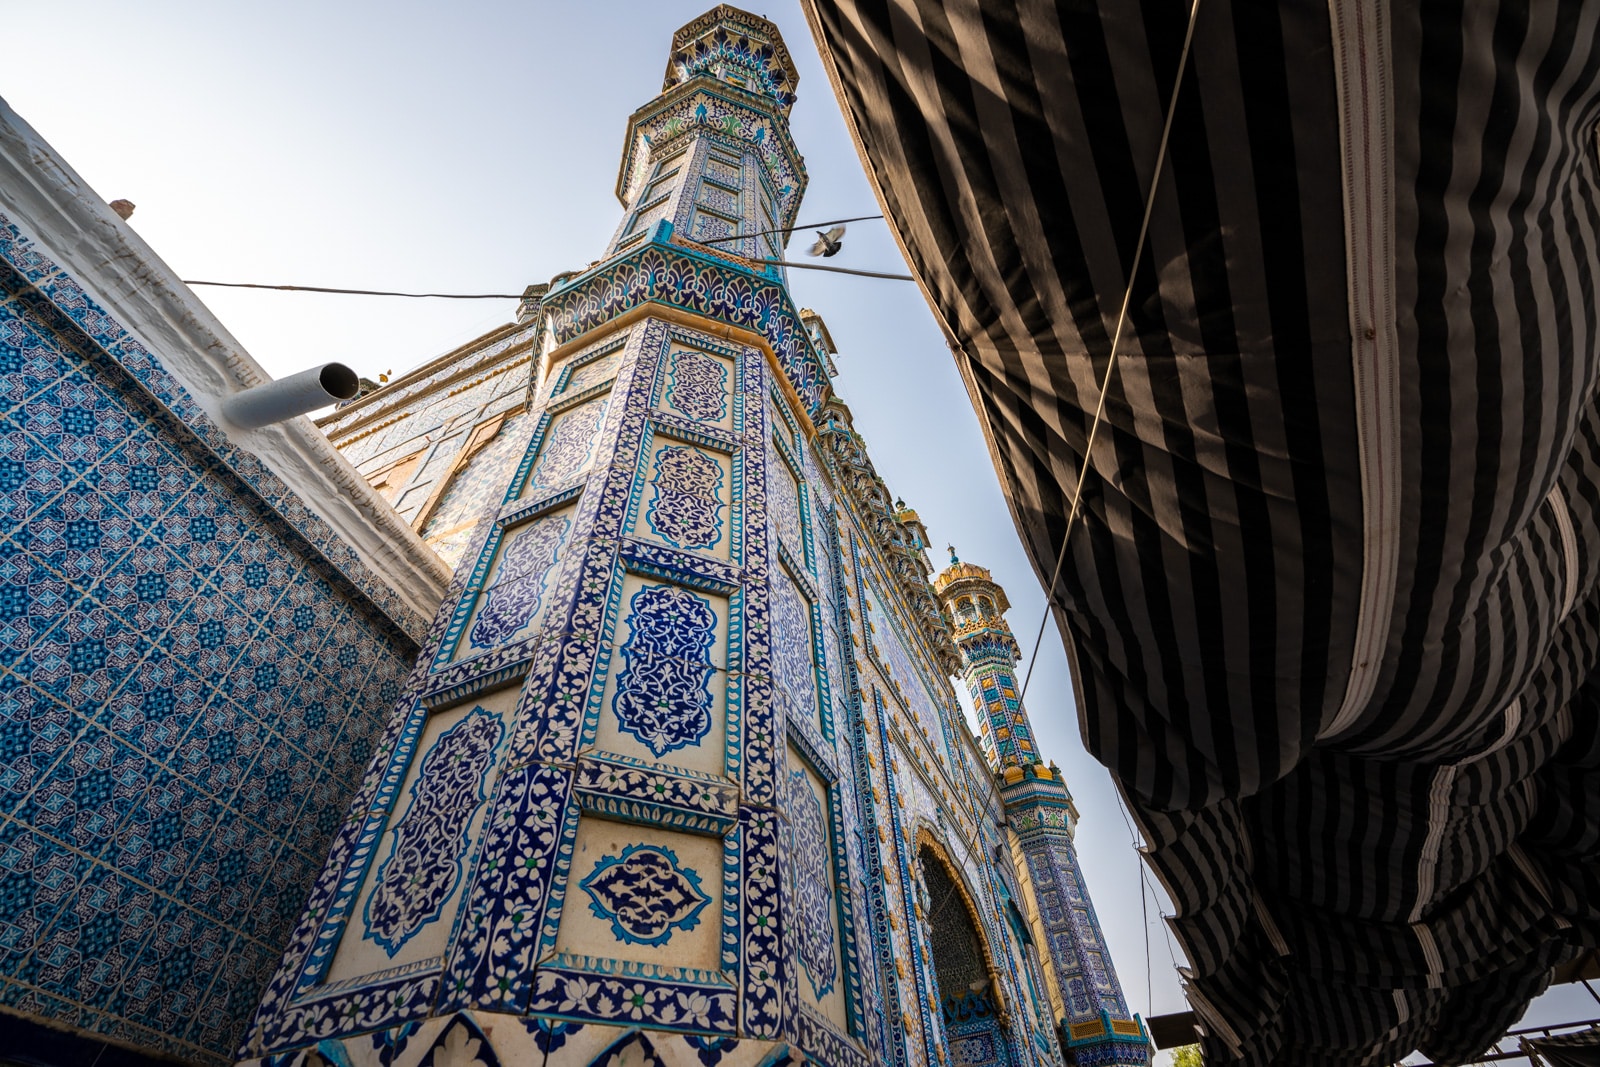 Sindh travel guide - Mosaic tiles on the shrine of Sachal Sarmast - Lost With Purpose travel blog